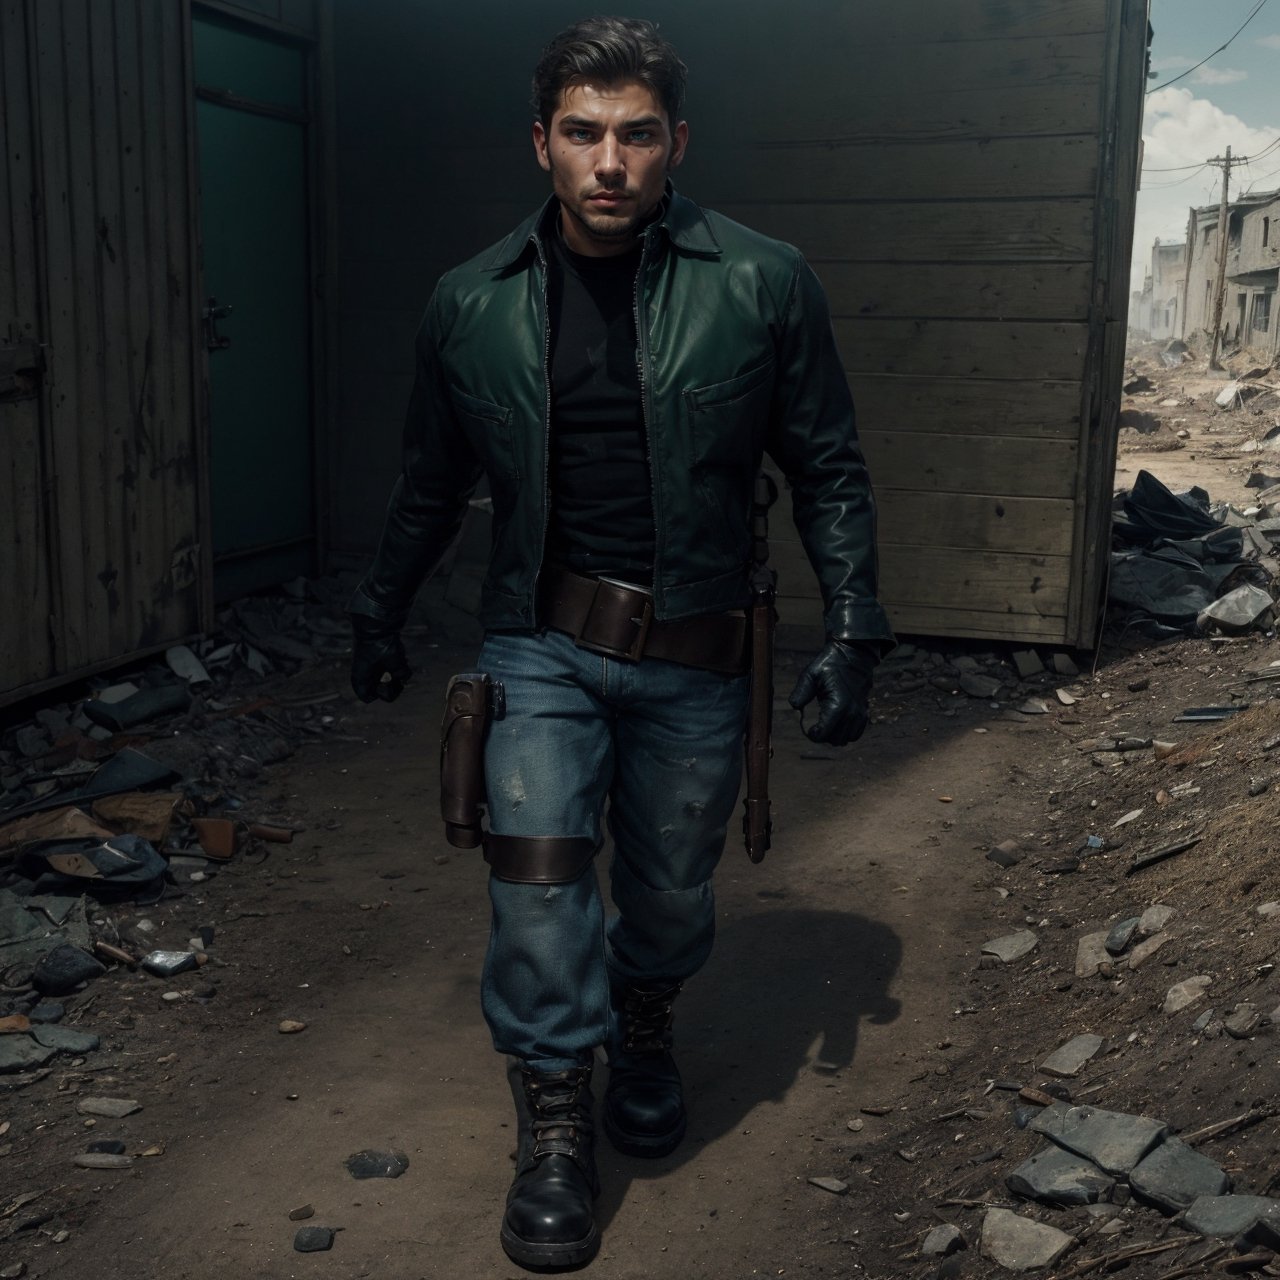 sole_male, "a 23 year old man, black jacket, green tshirt, black combat boots, black gloves, gun holster on right leg, leather belt, worn jeans, walking through a post apocolyptic wasteland.", 